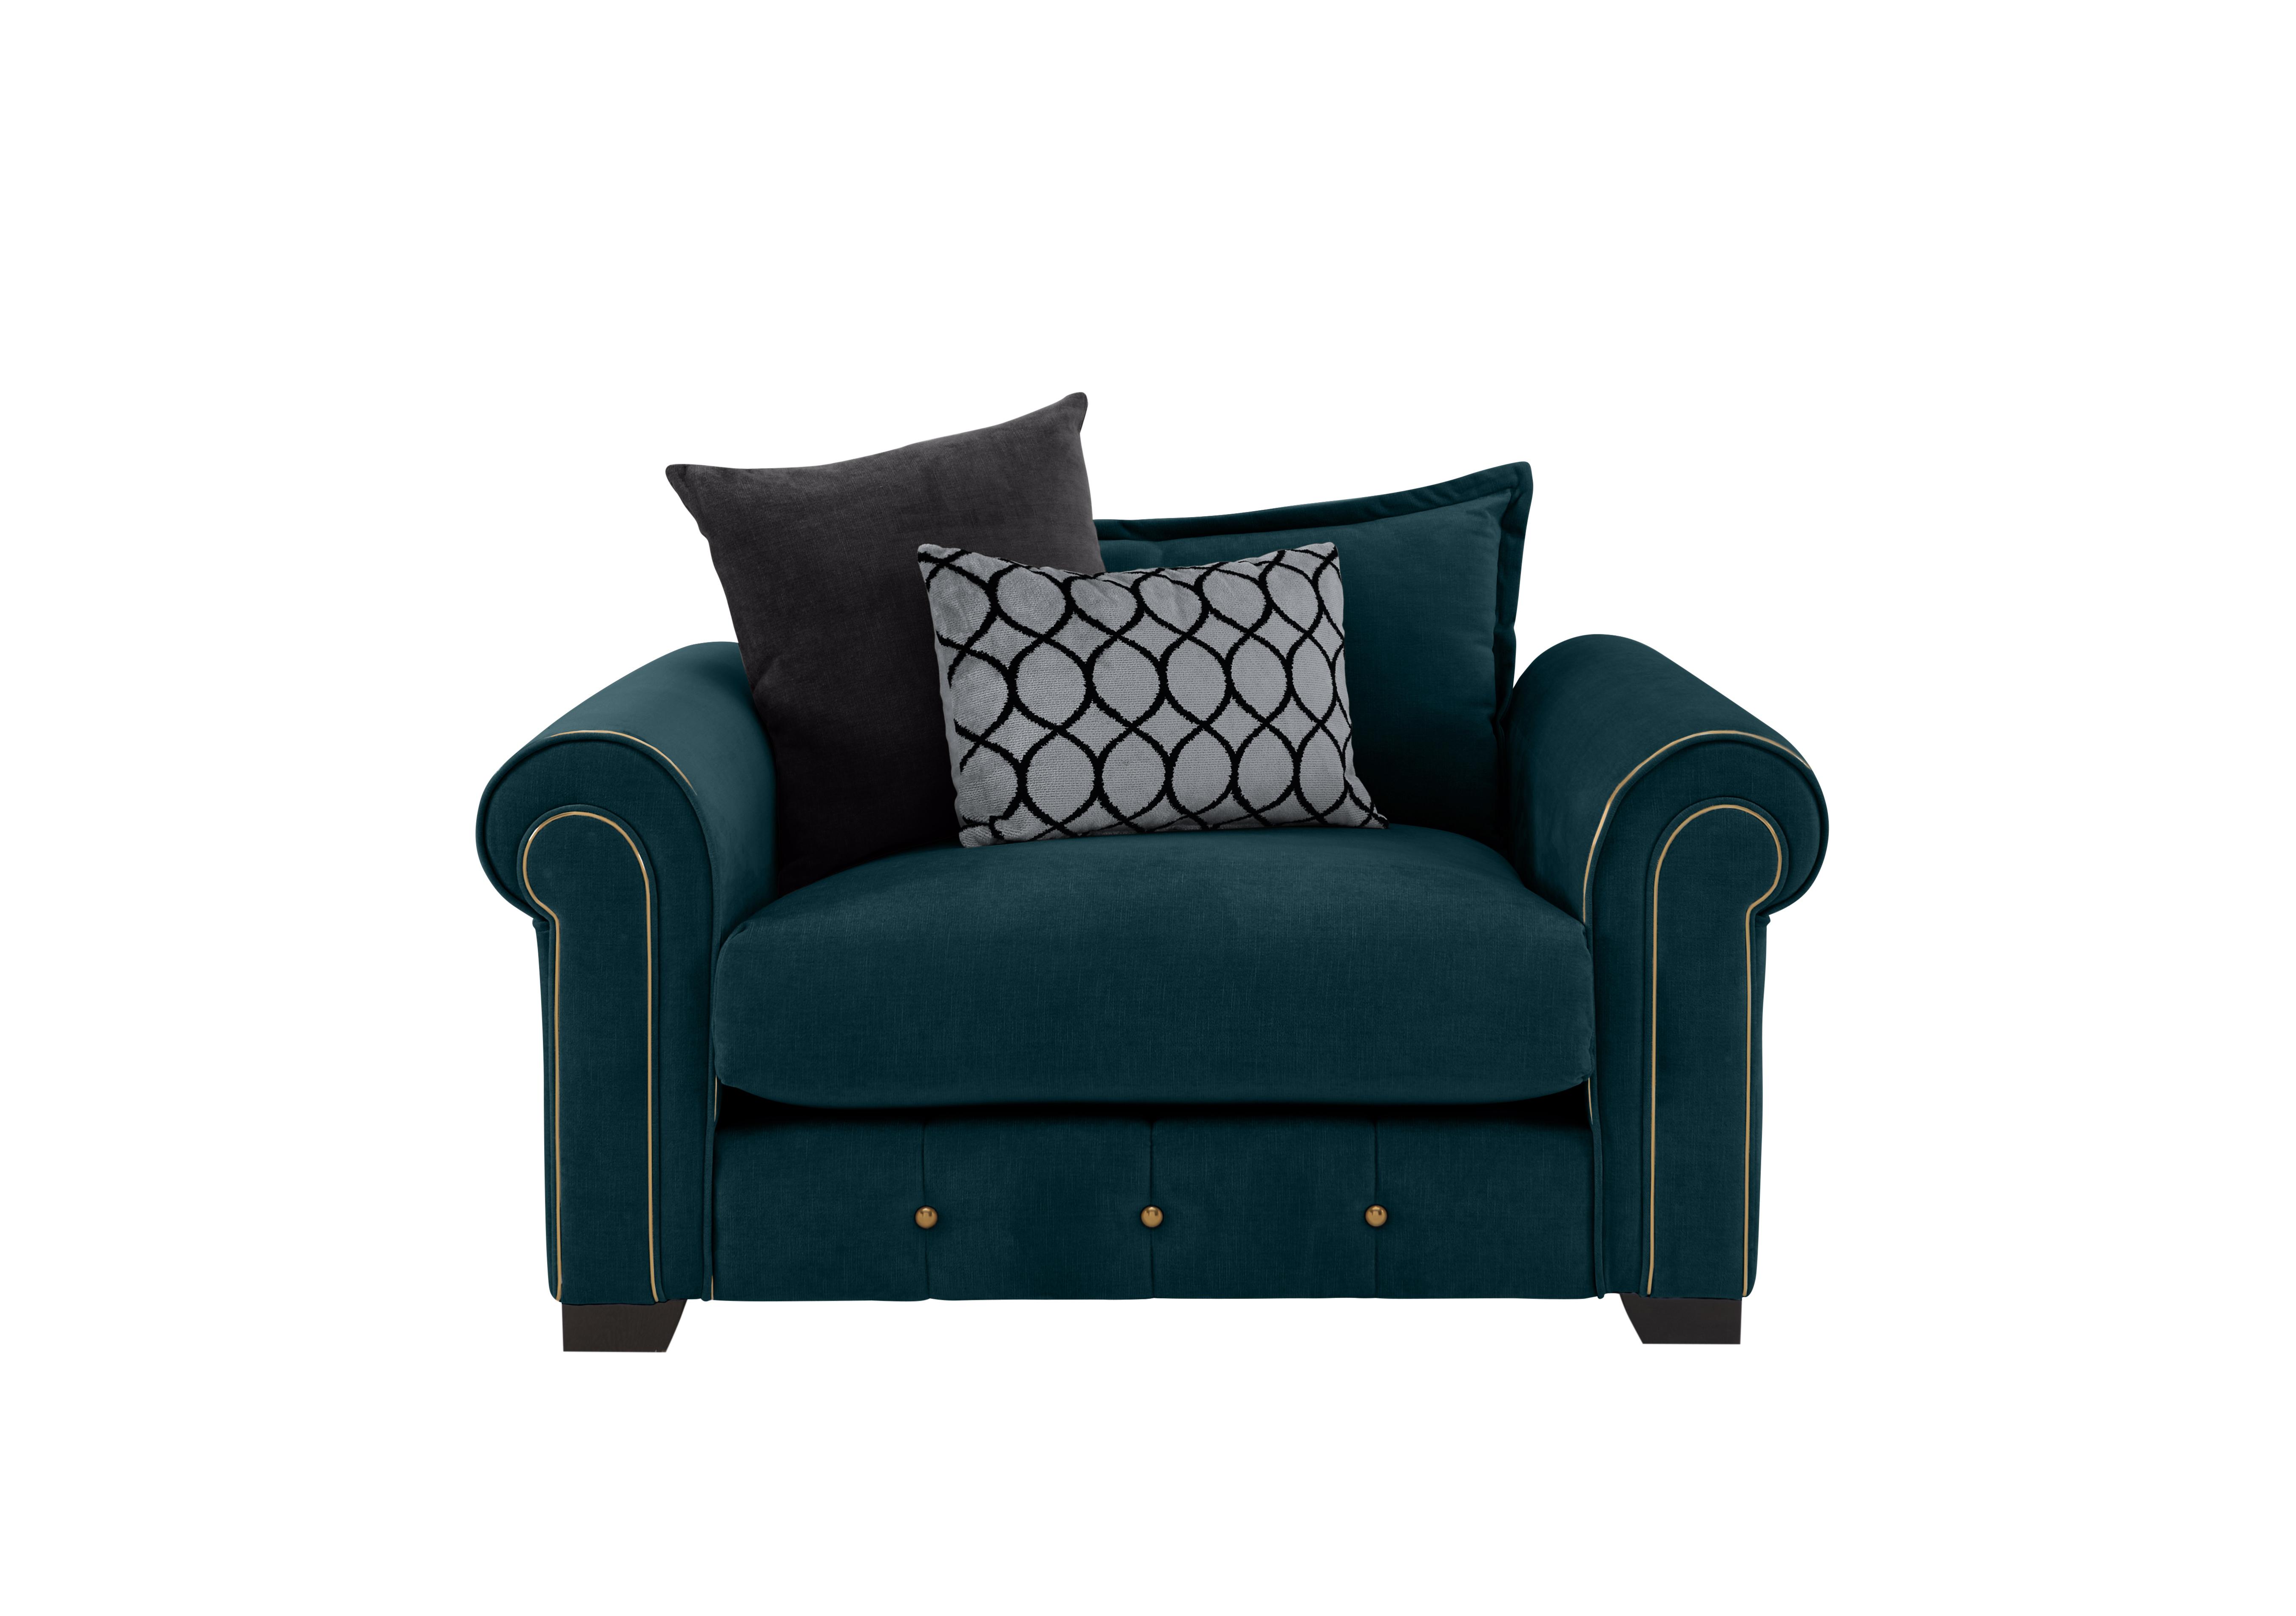 Sumptuous Fabric Snuggler Chair in Chamonix Teal Dk/Gold on Furniture Village